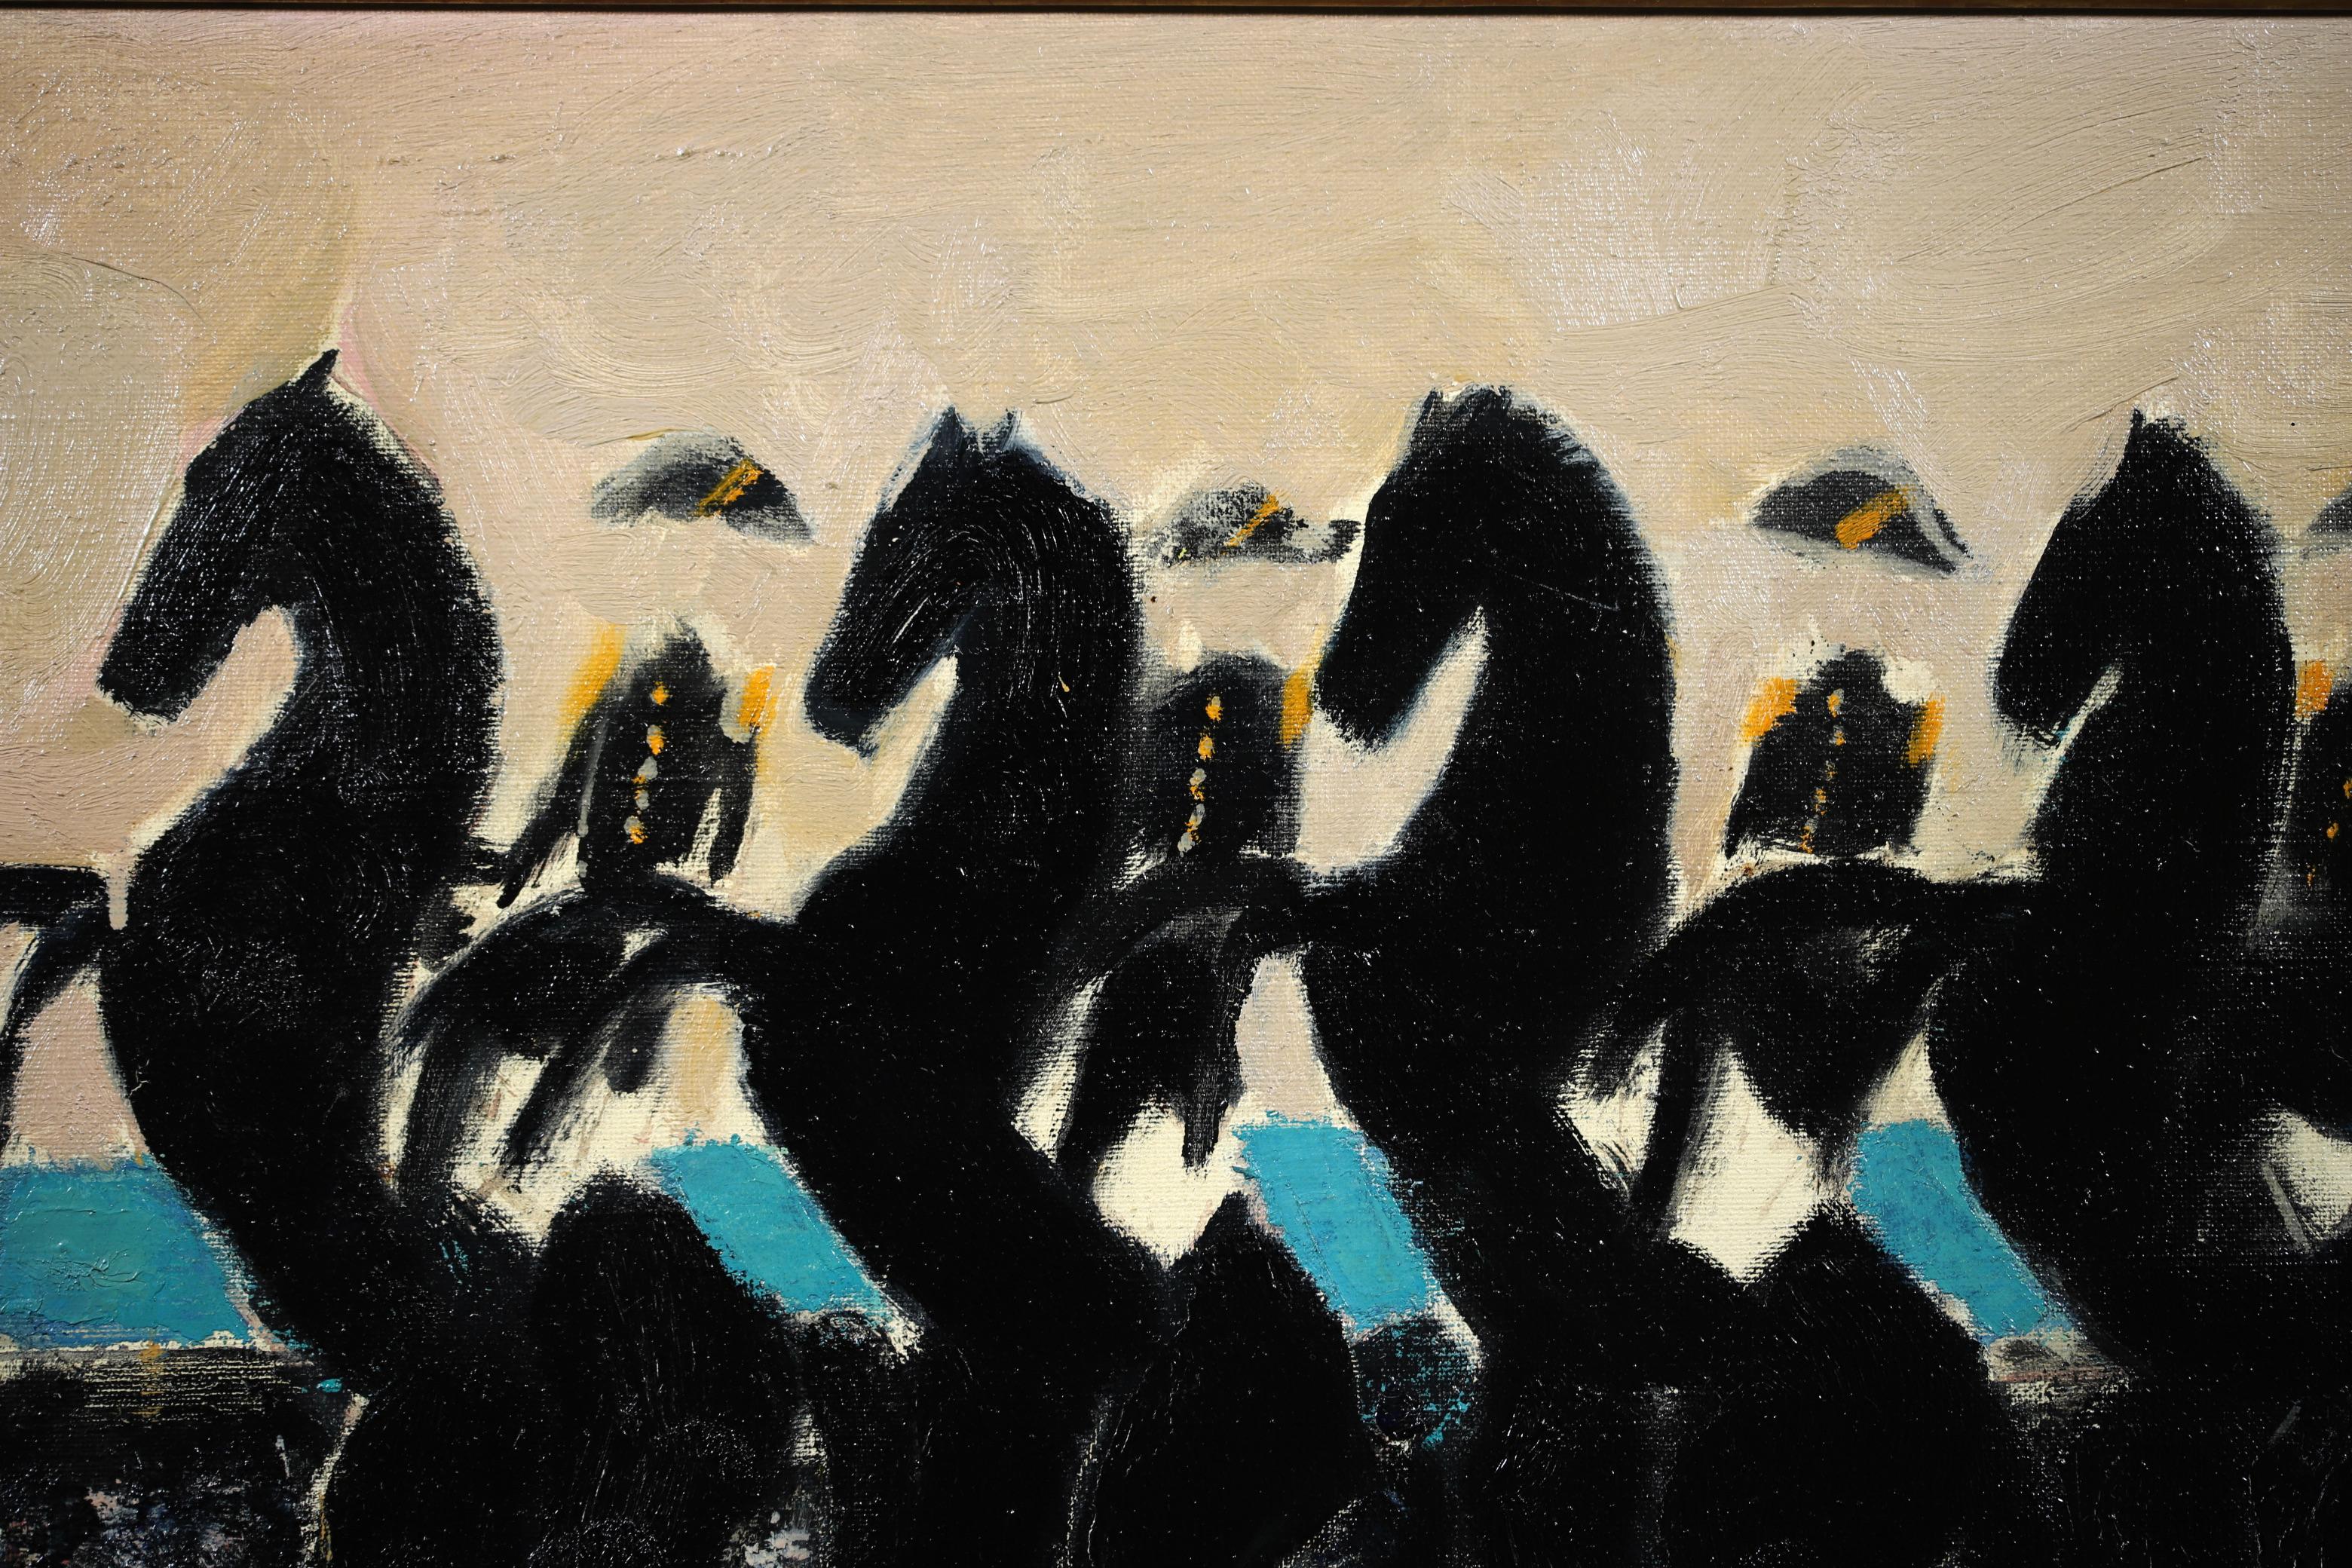 Signed oil on canvas circa 1965 by French expressionist painter Andre Brasilier. The work depicts four military men in French naval uniform on black horses. A wonderful piece in the artist's distinctive style.

Signature:
Signed: Signed lower